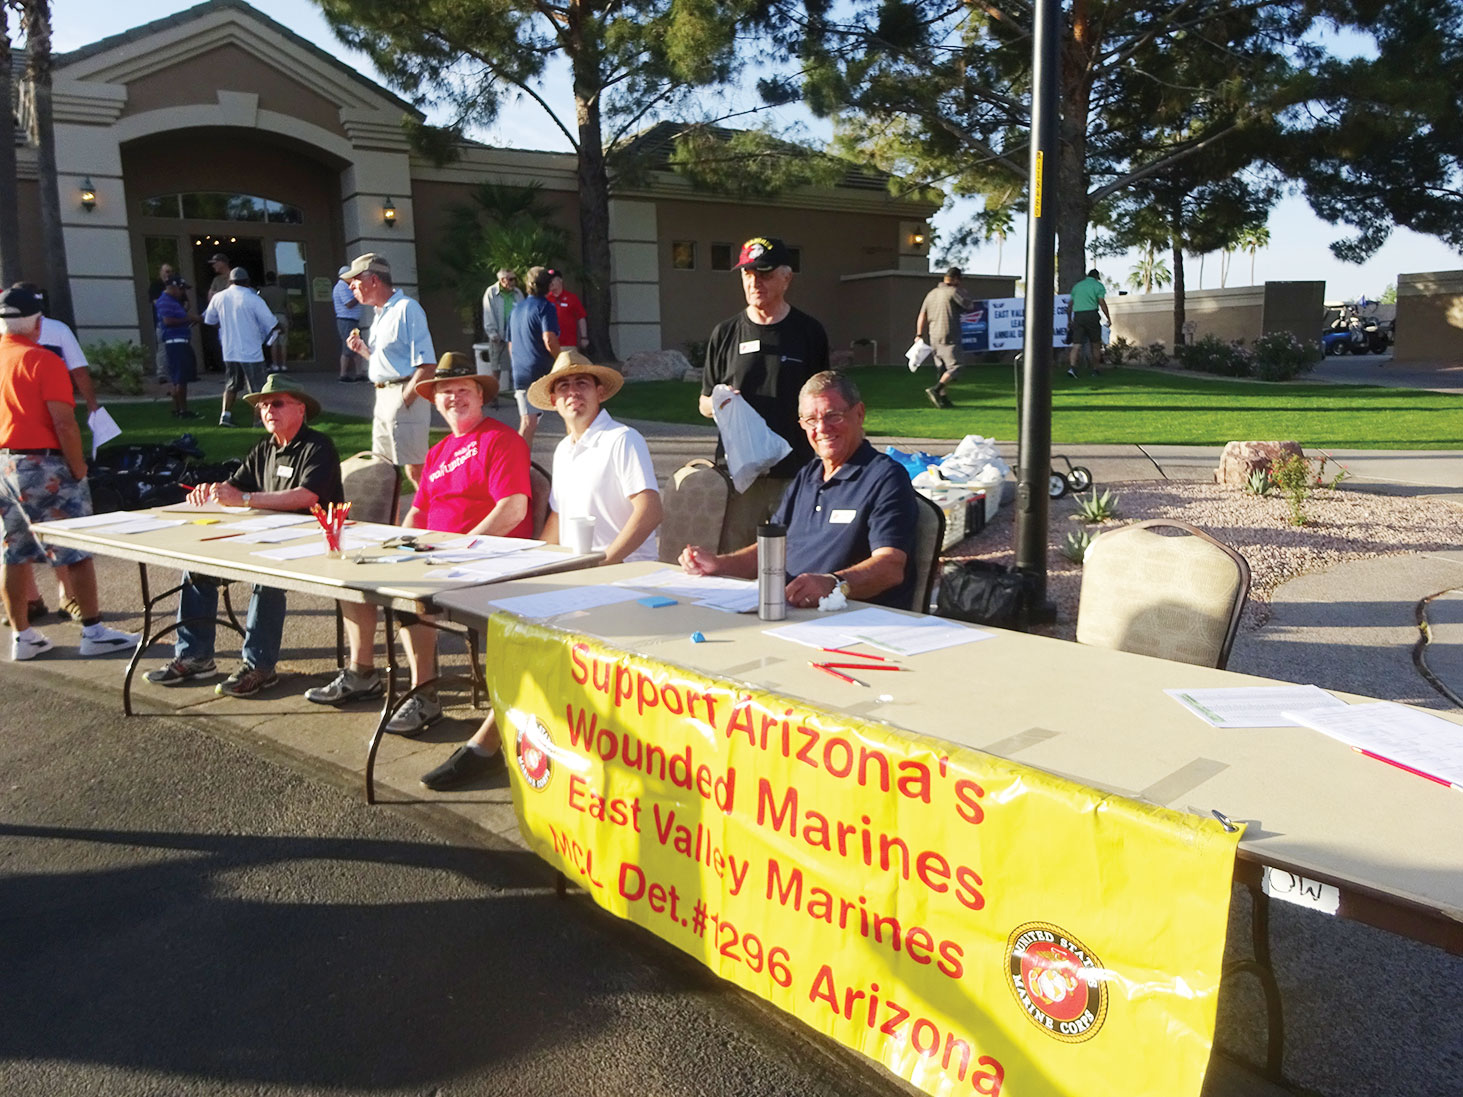 The Marine Corps League annual golf tournament benefits the Wounded Warriors and the Marines Helping Marines program.